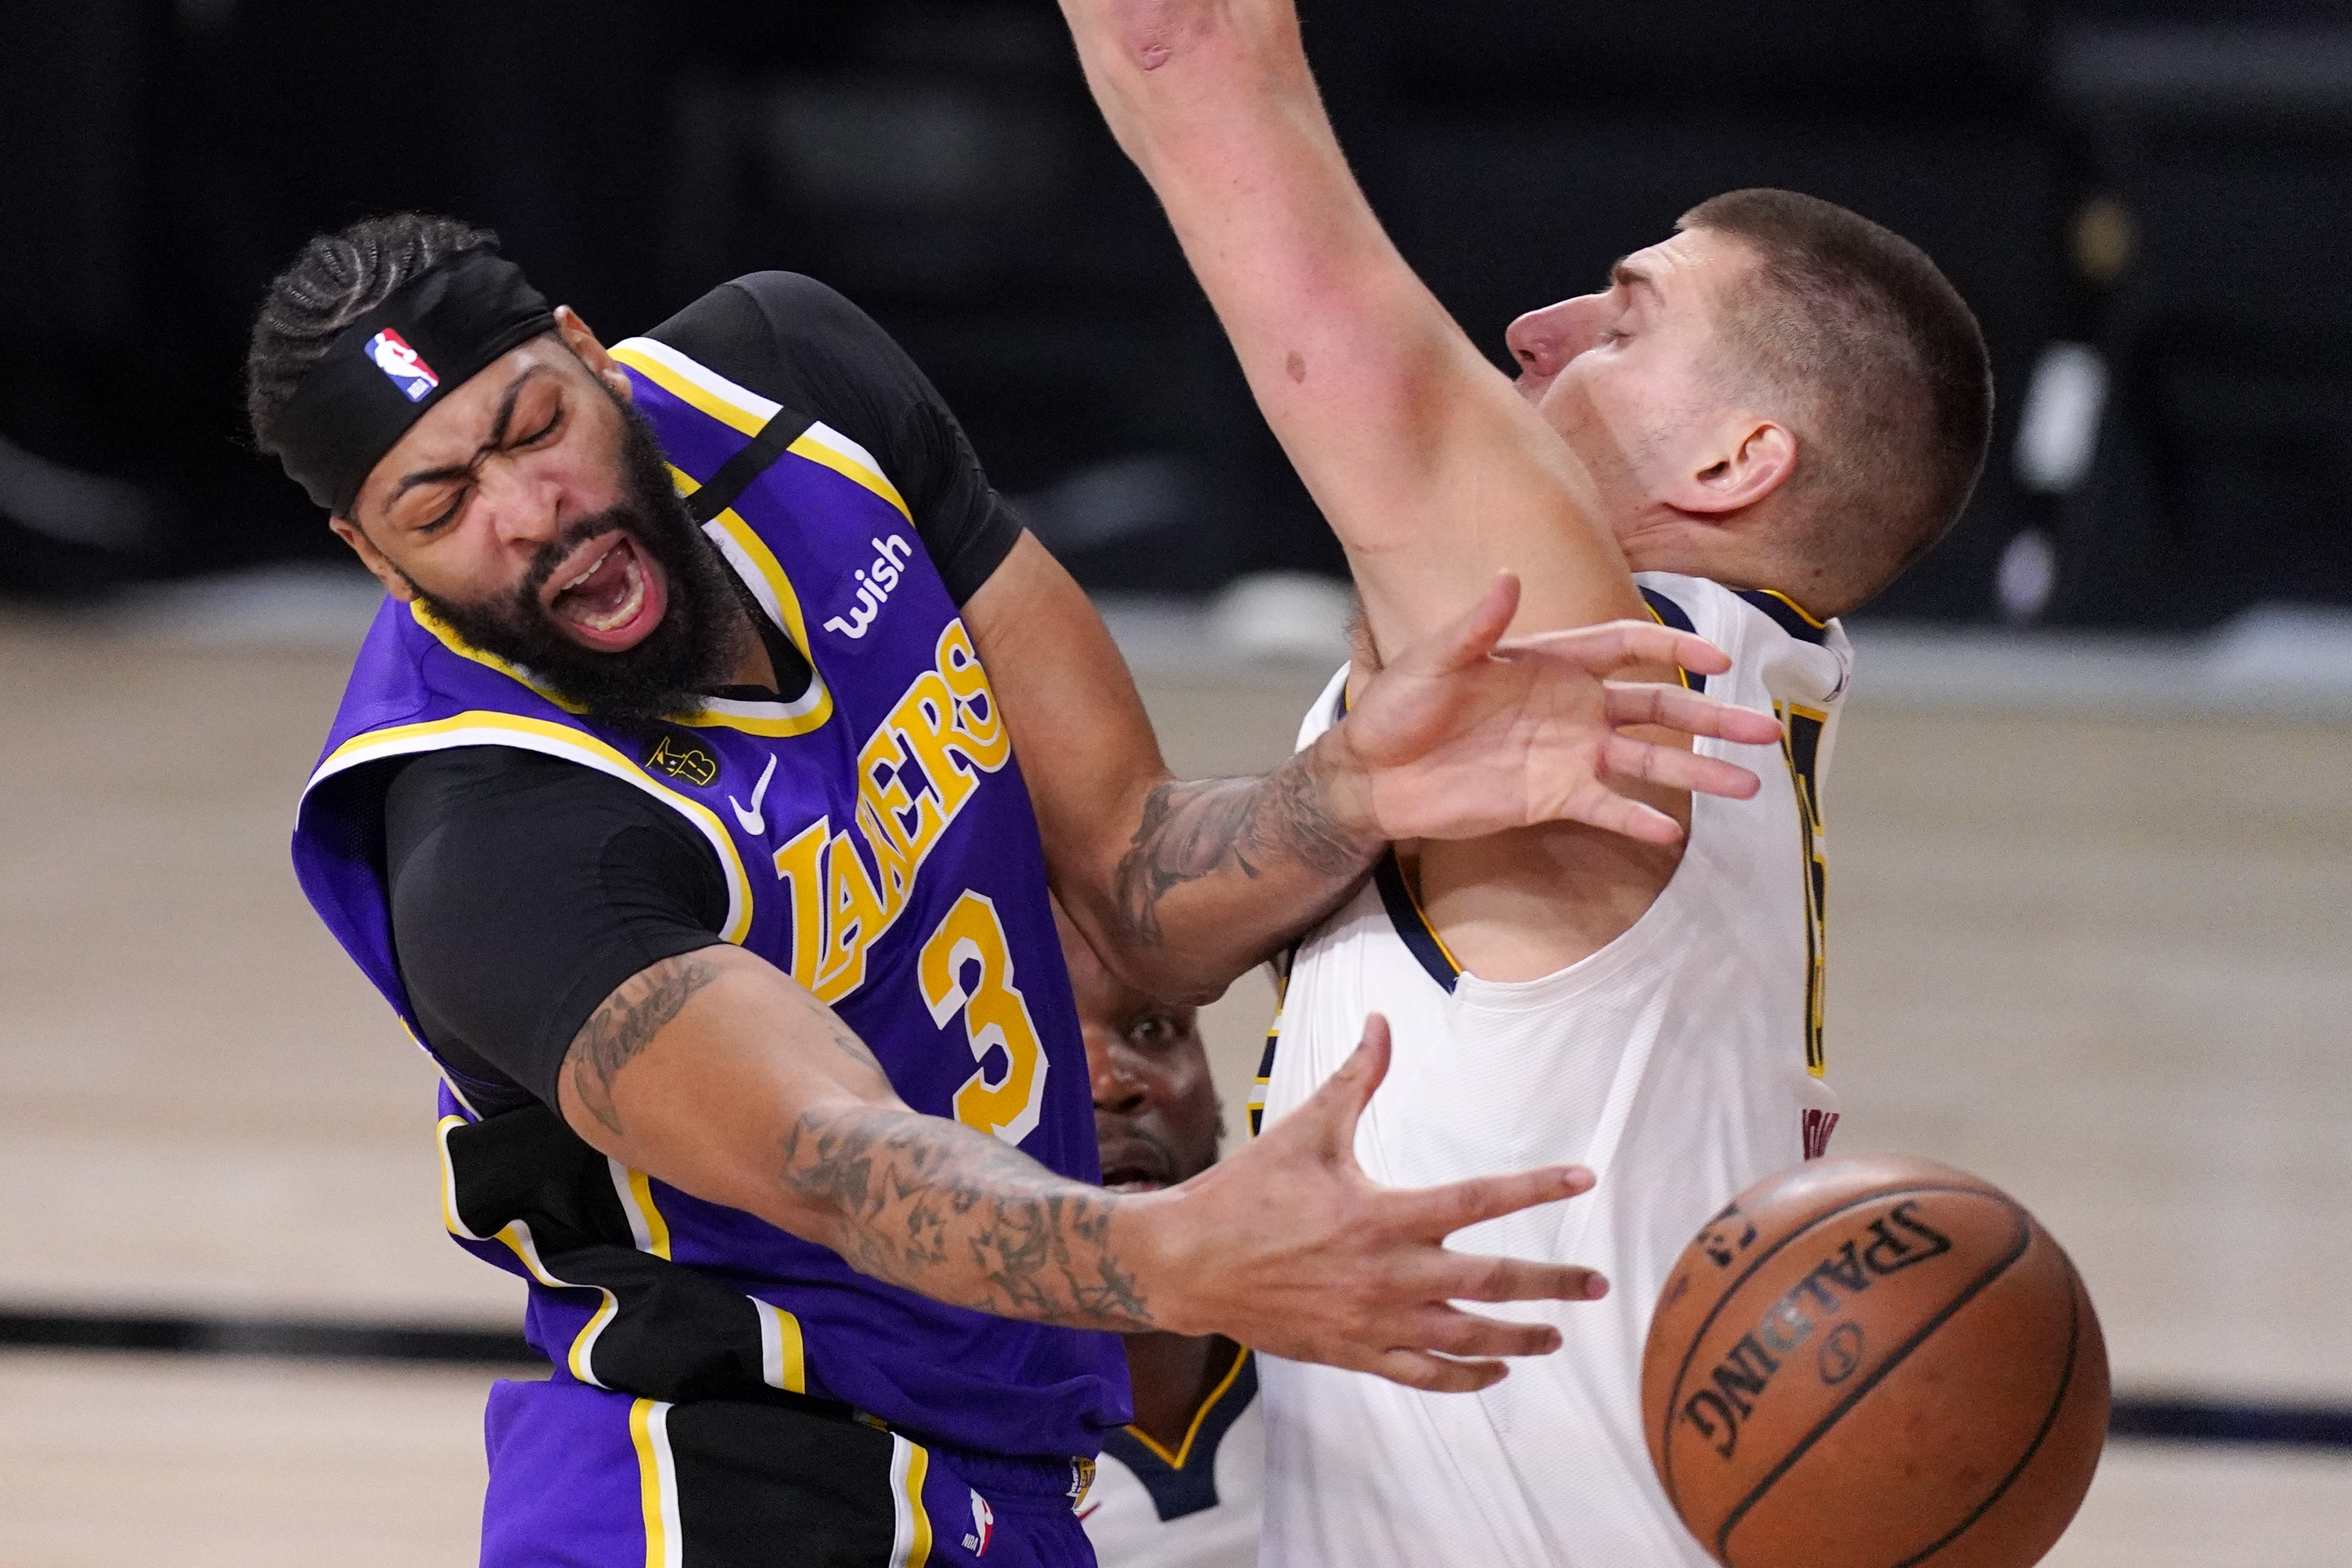 LeBron James, Lakers beat Nuggets in Game 5 to reach NBA Finals